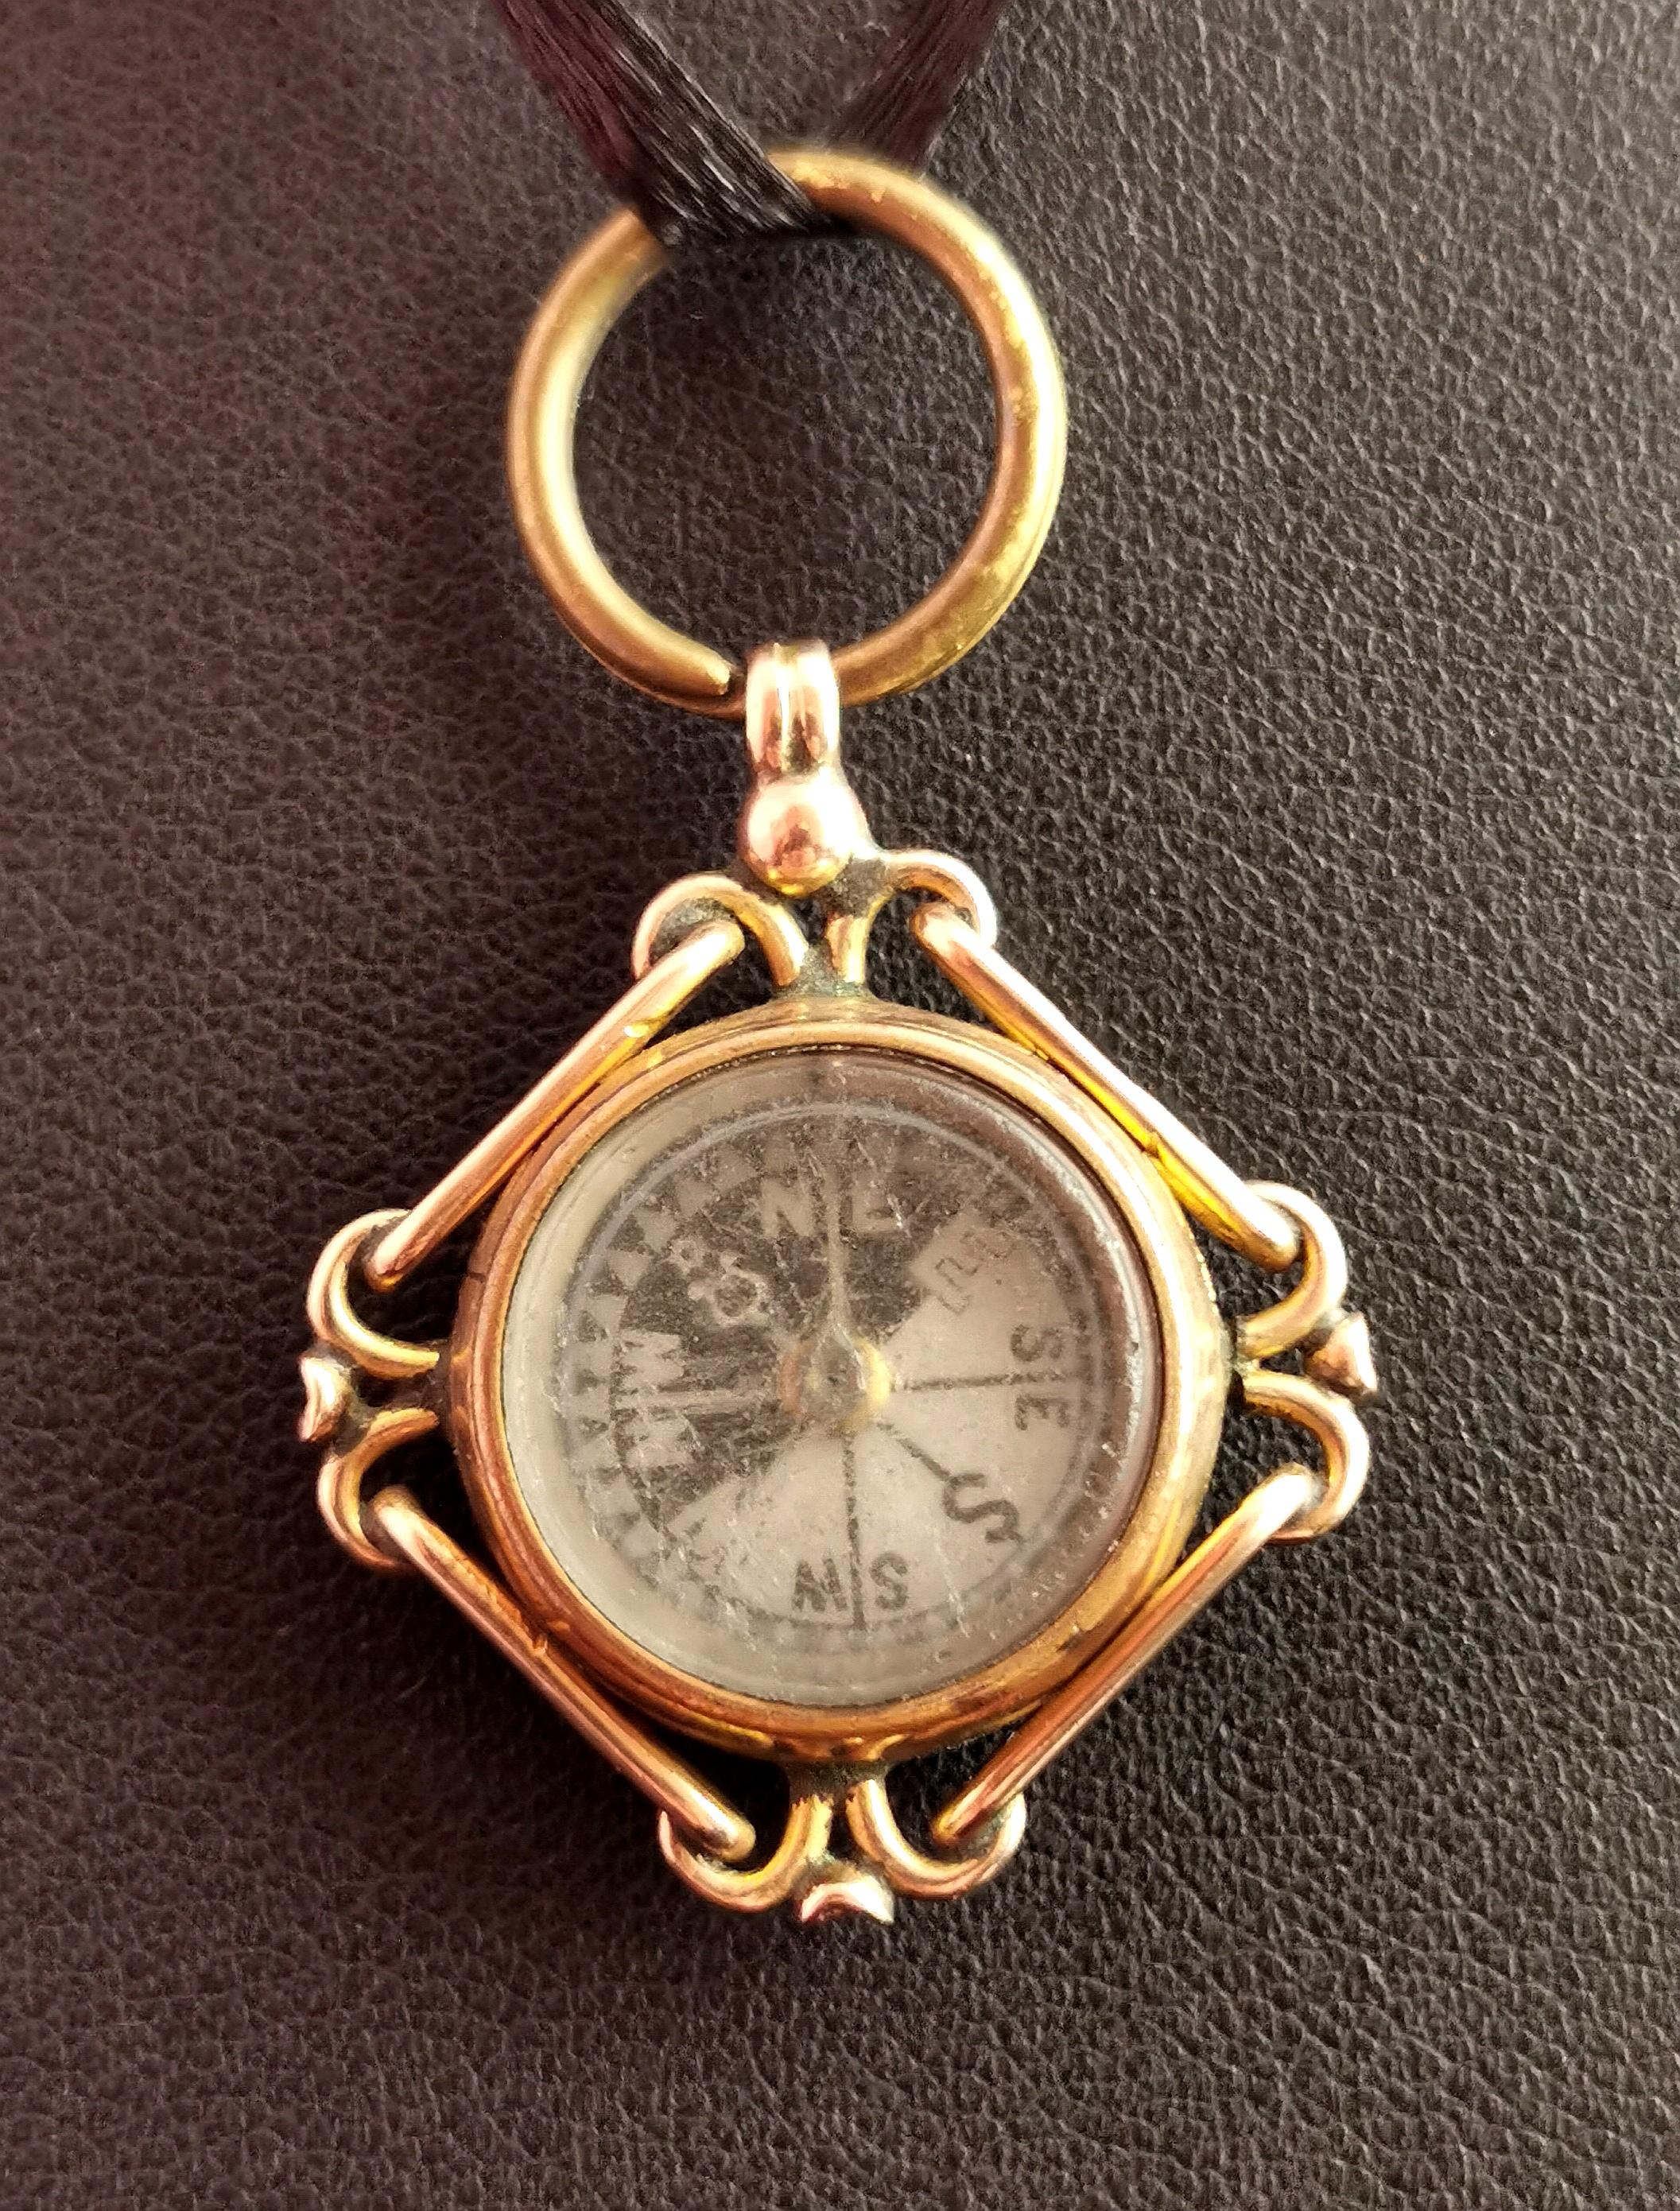 A beautiful antique 9kt gold compass pendant or fob.

It has a Carnelian stone set to one side which has not been engraved and is a smooth polished deep red.

The other side features a compass which appears to be in working order though I can't